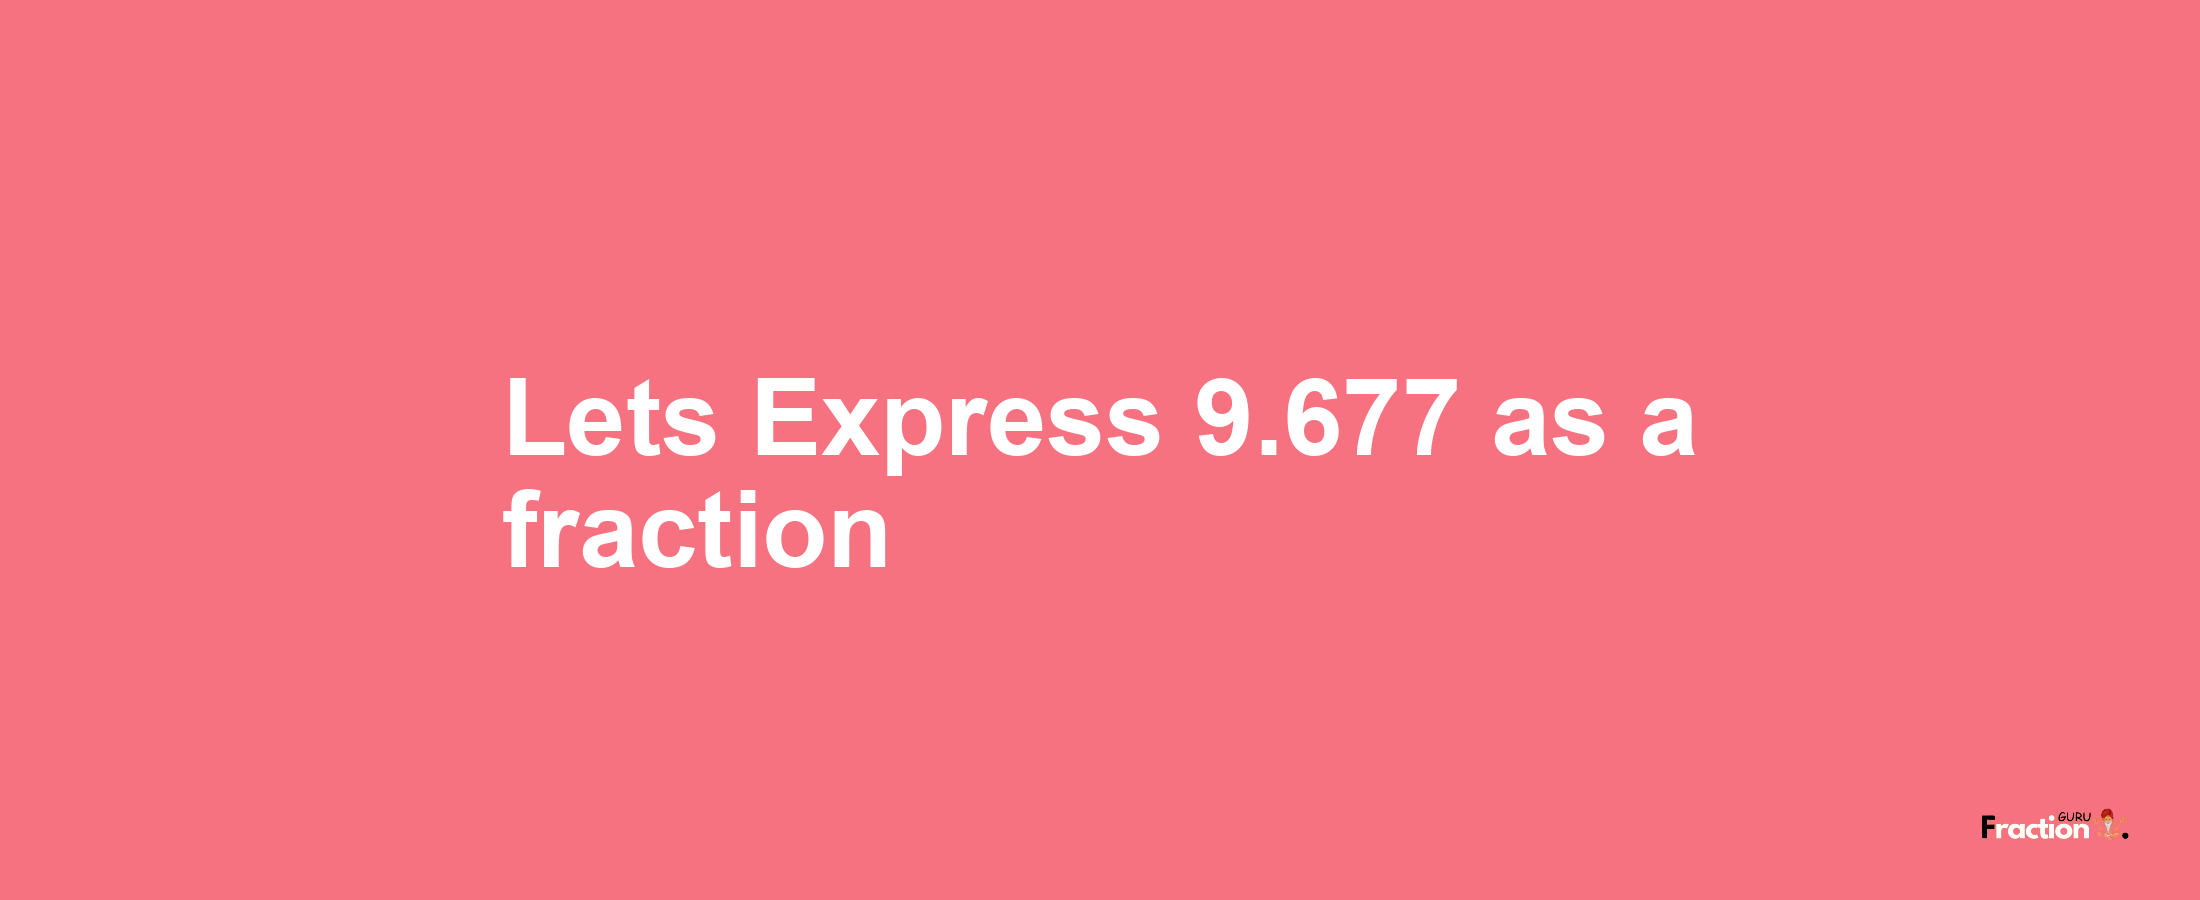 Lets Express 9.677 as afraction